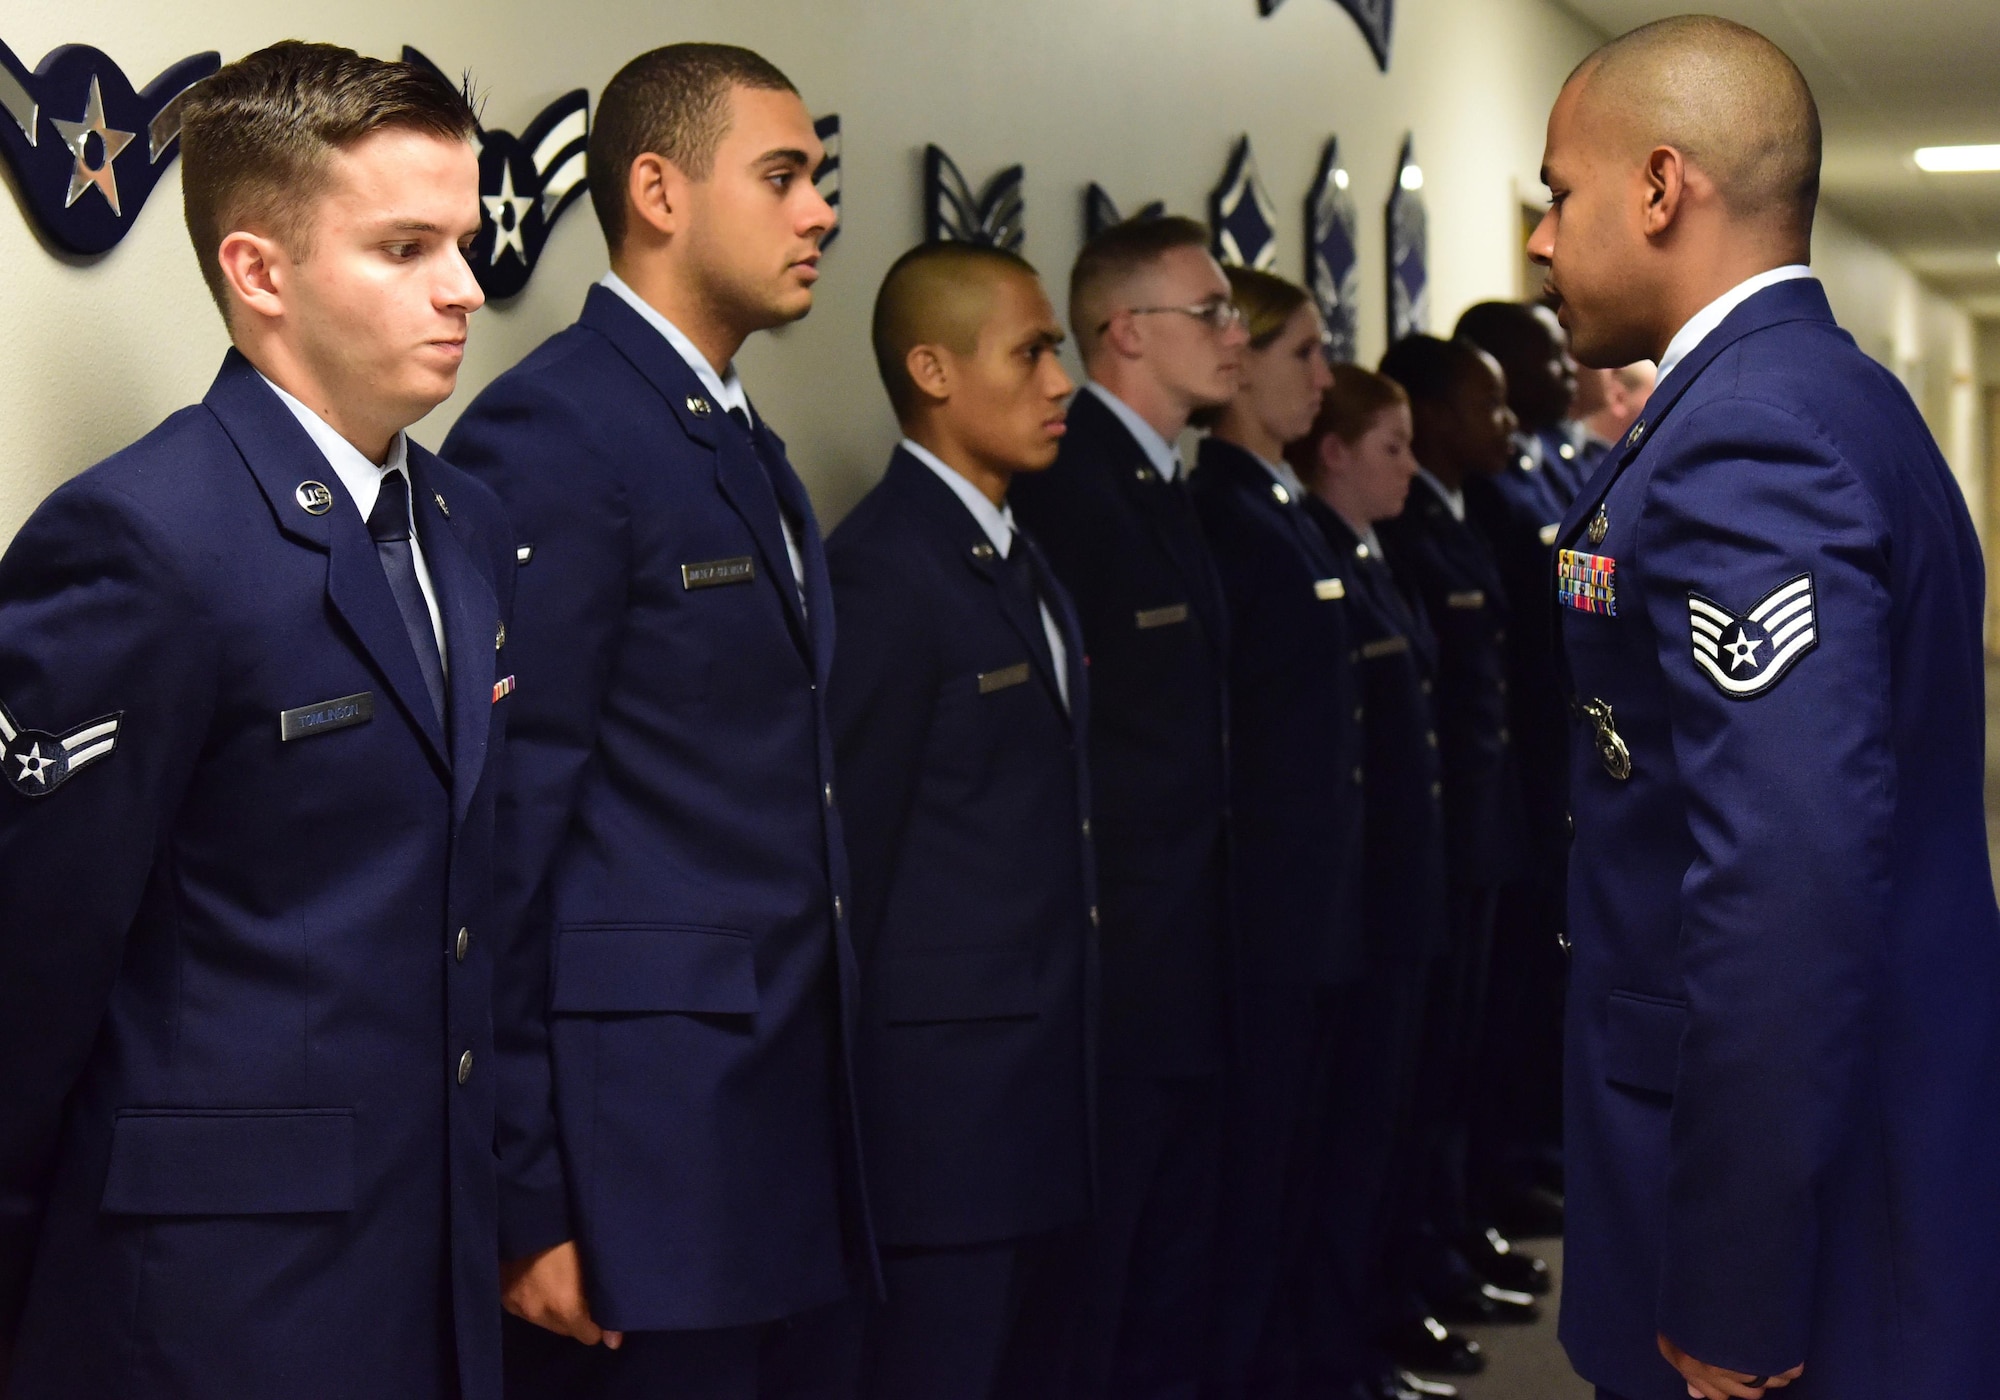 U.S. Air Force Staff Sgt. Bryan Robinson, the First Term Airmen Course (FTAC) NCO in charge, conducts a uniform inspection at Whiteman Air Force Base, Mo., Aug. 7, 2017. Airmen begin the course with a full service dress blues uniform inspection before starting the "Enhancing Human Capital" part of the professionalism training. (U.S. Air Force photo/Staff Sgt. Danielle Quilla)